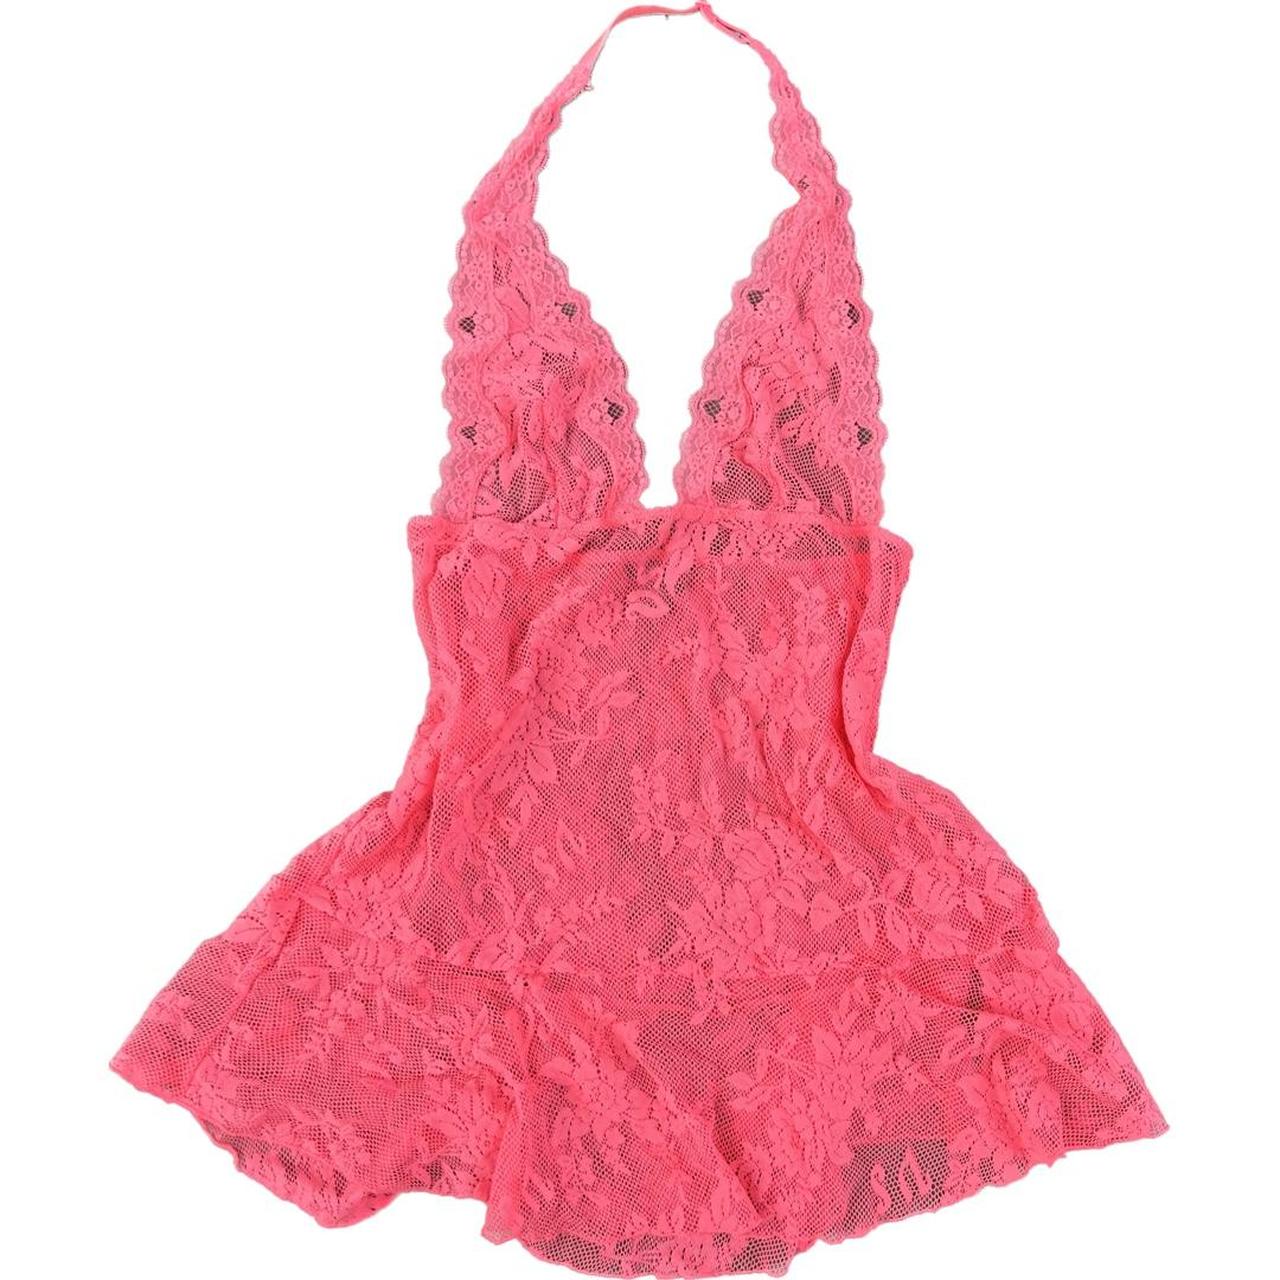 🎀 Bright pink lace 🌟 Pictures don’t do the color... - Depop